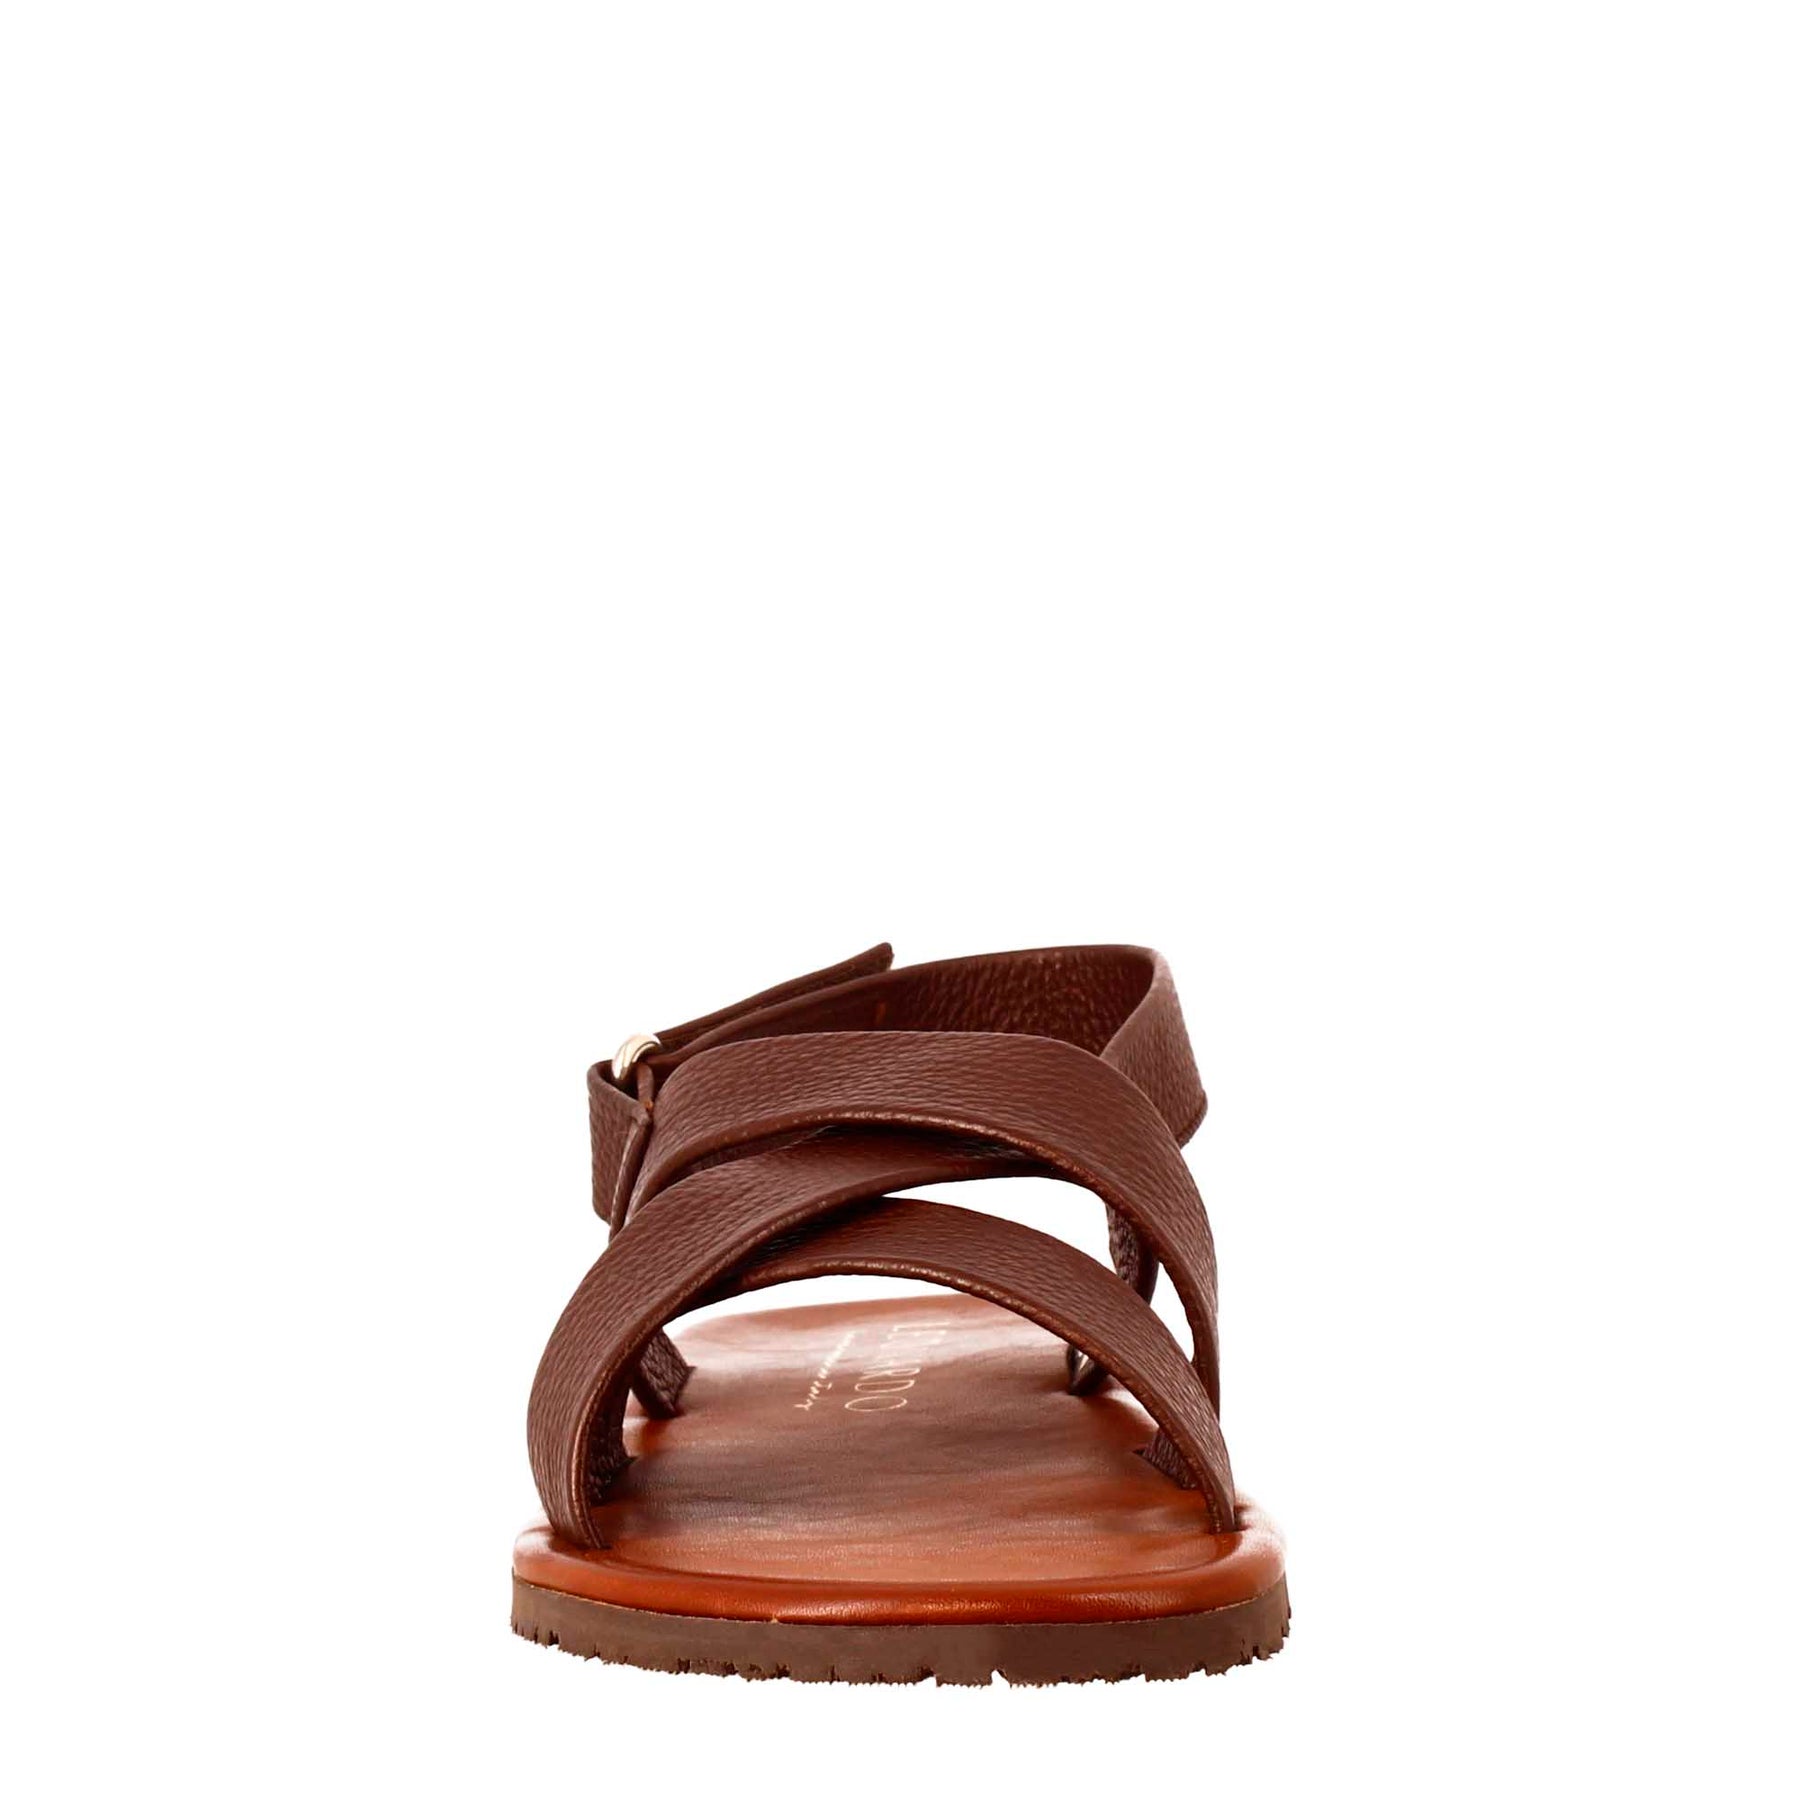 Handmade men's sandals in brown leather with velcro closure